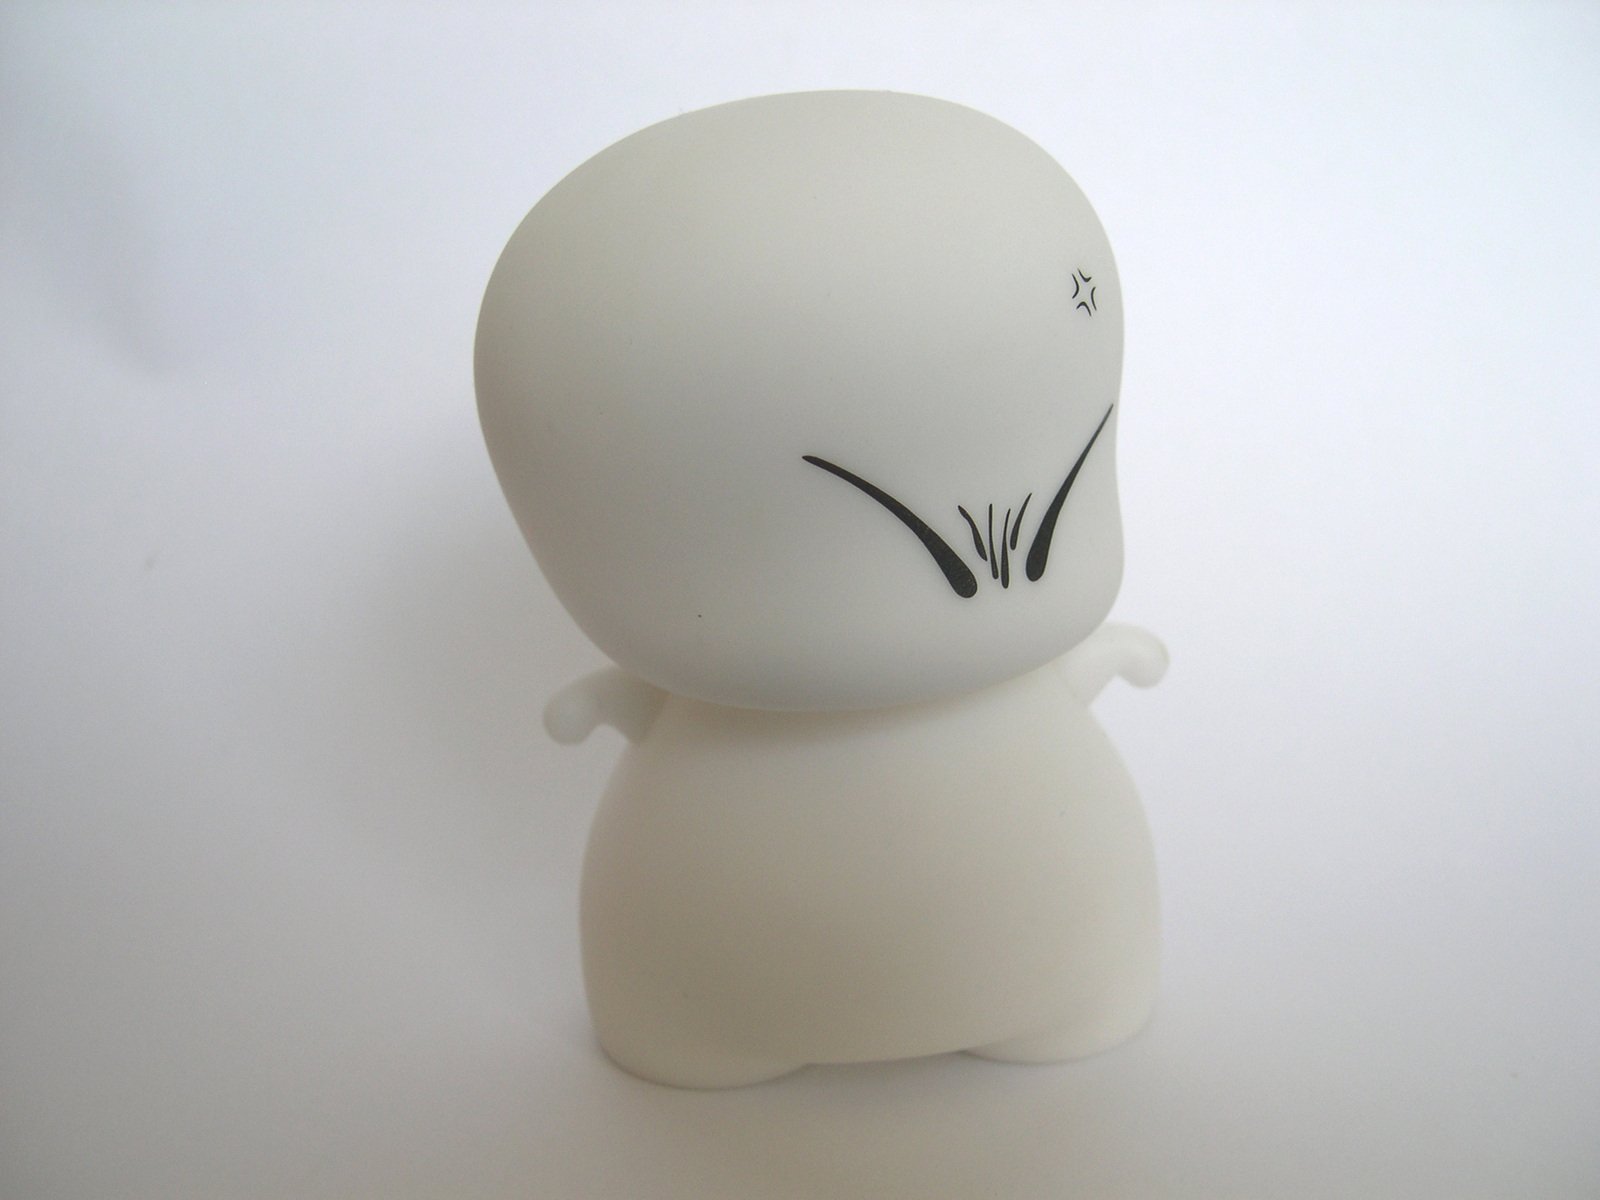 a white faceless, plastic stuffed toy with the eyes closed